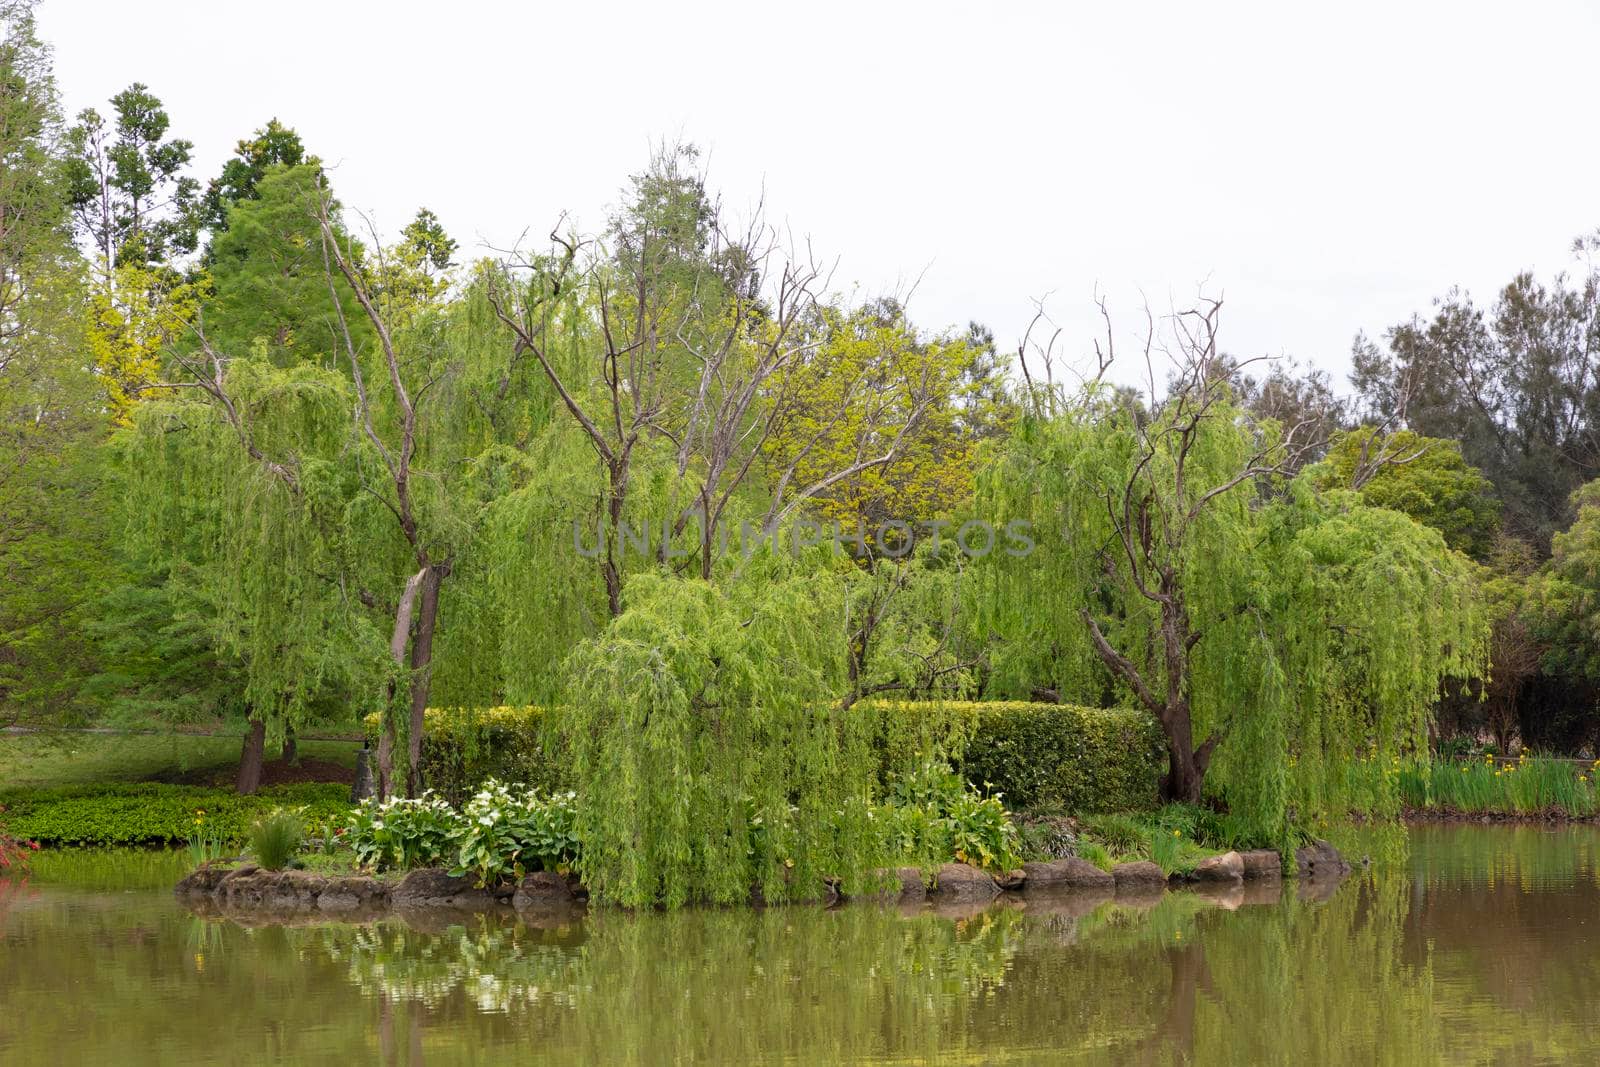 A large willow tree and red flowers in a pond in a large garden in regional Australia